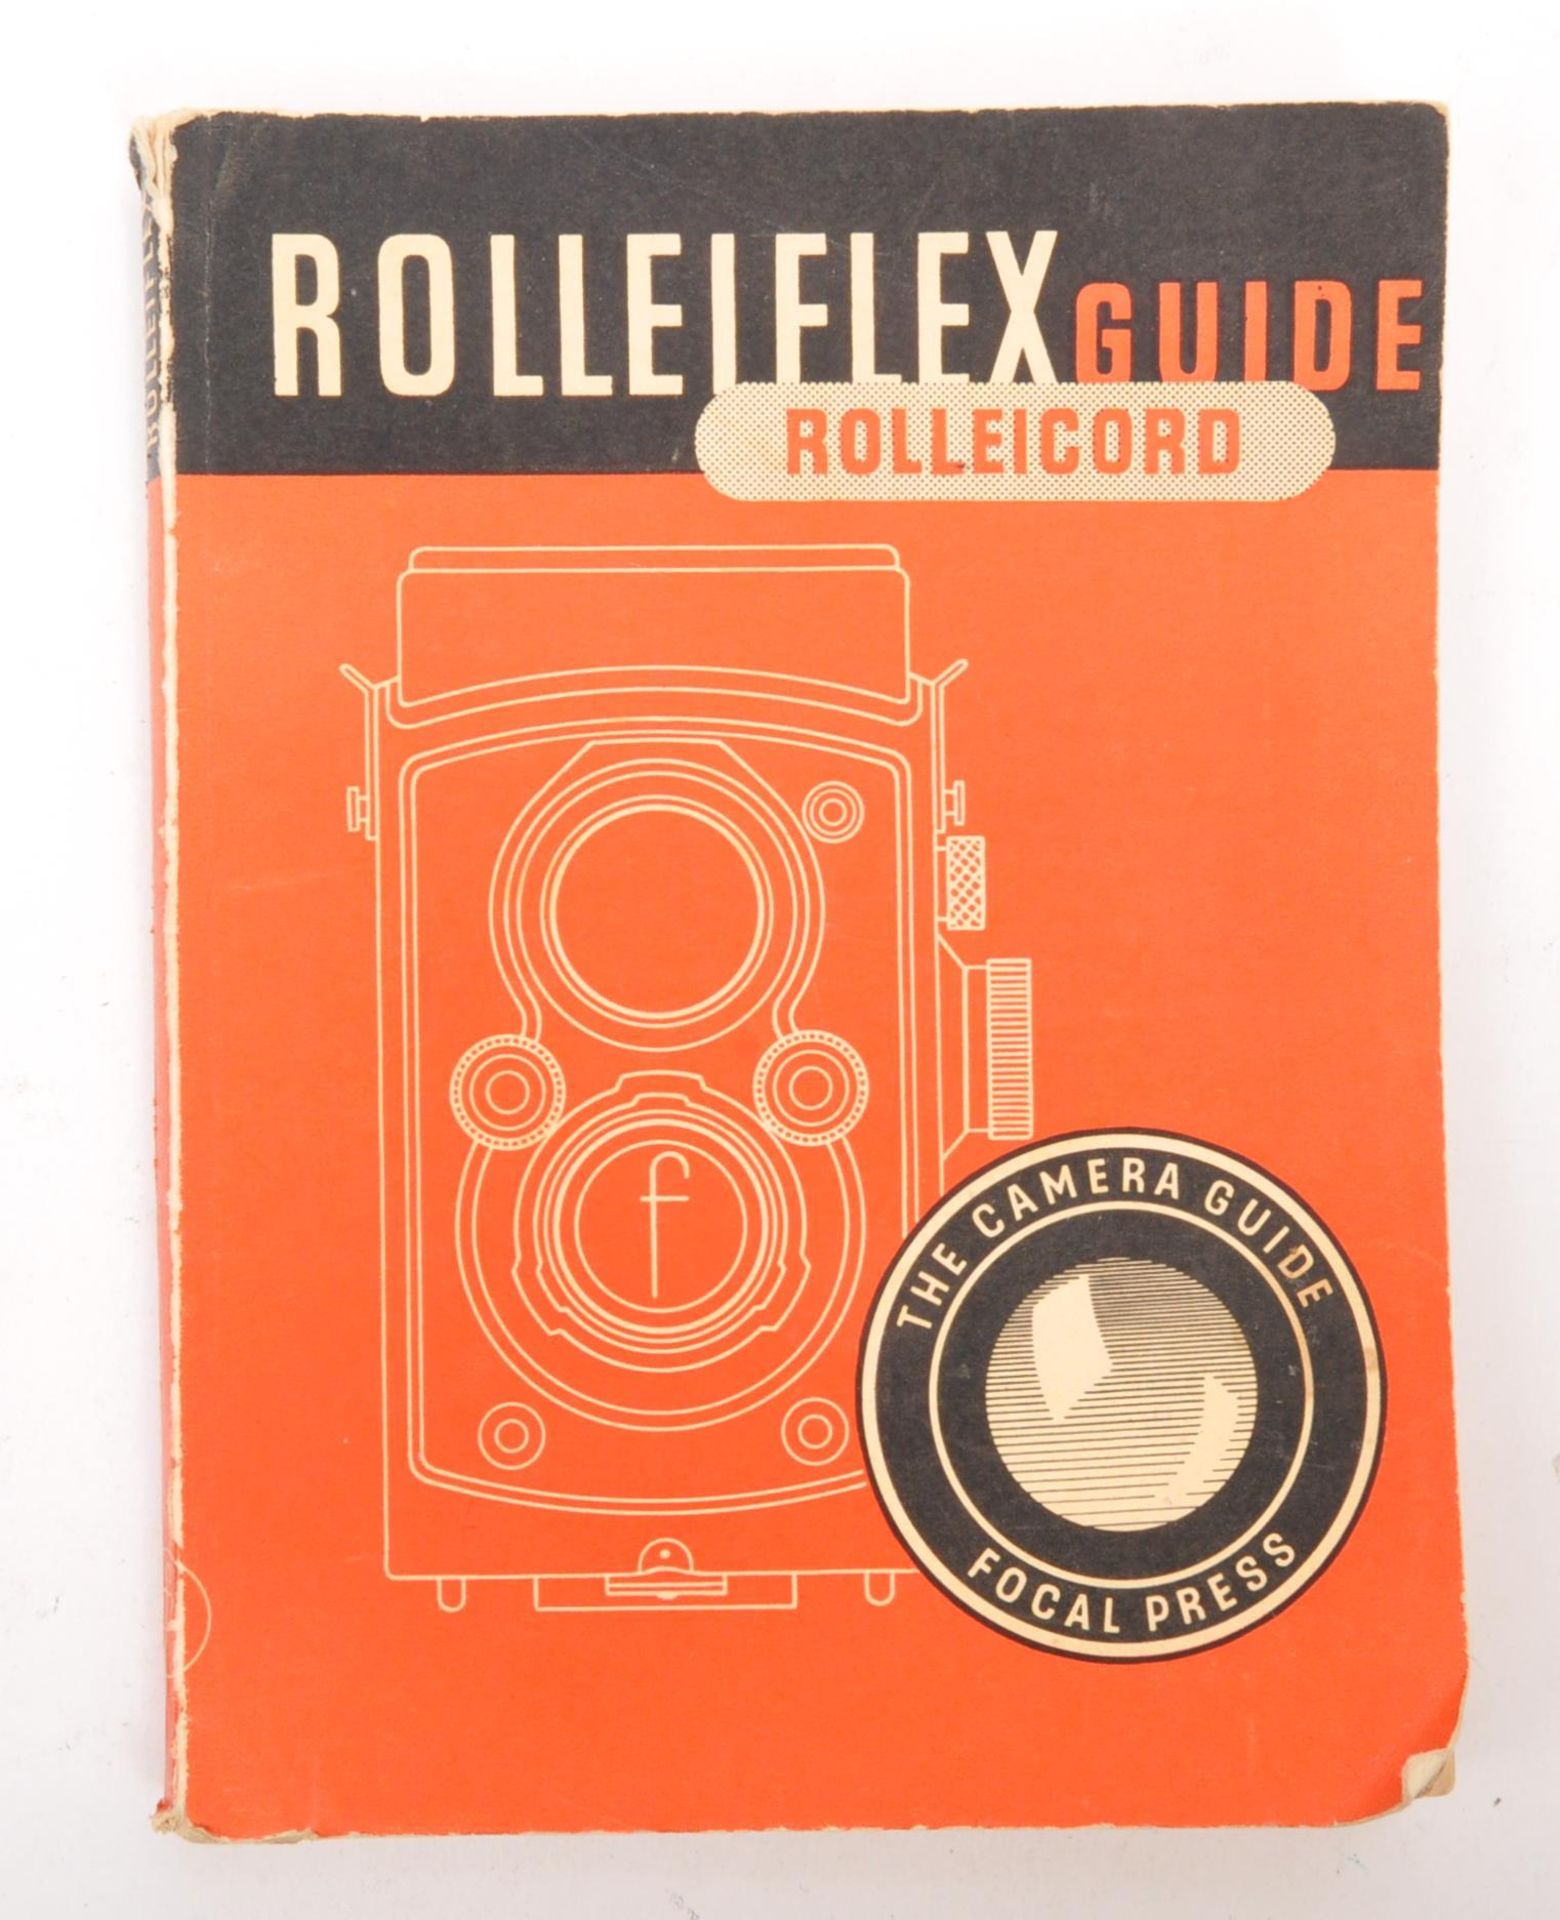 1920S ROLLEIFLEX ROLLEICORD BOX CAMERA - NO. 37706. - Image 7 of 7